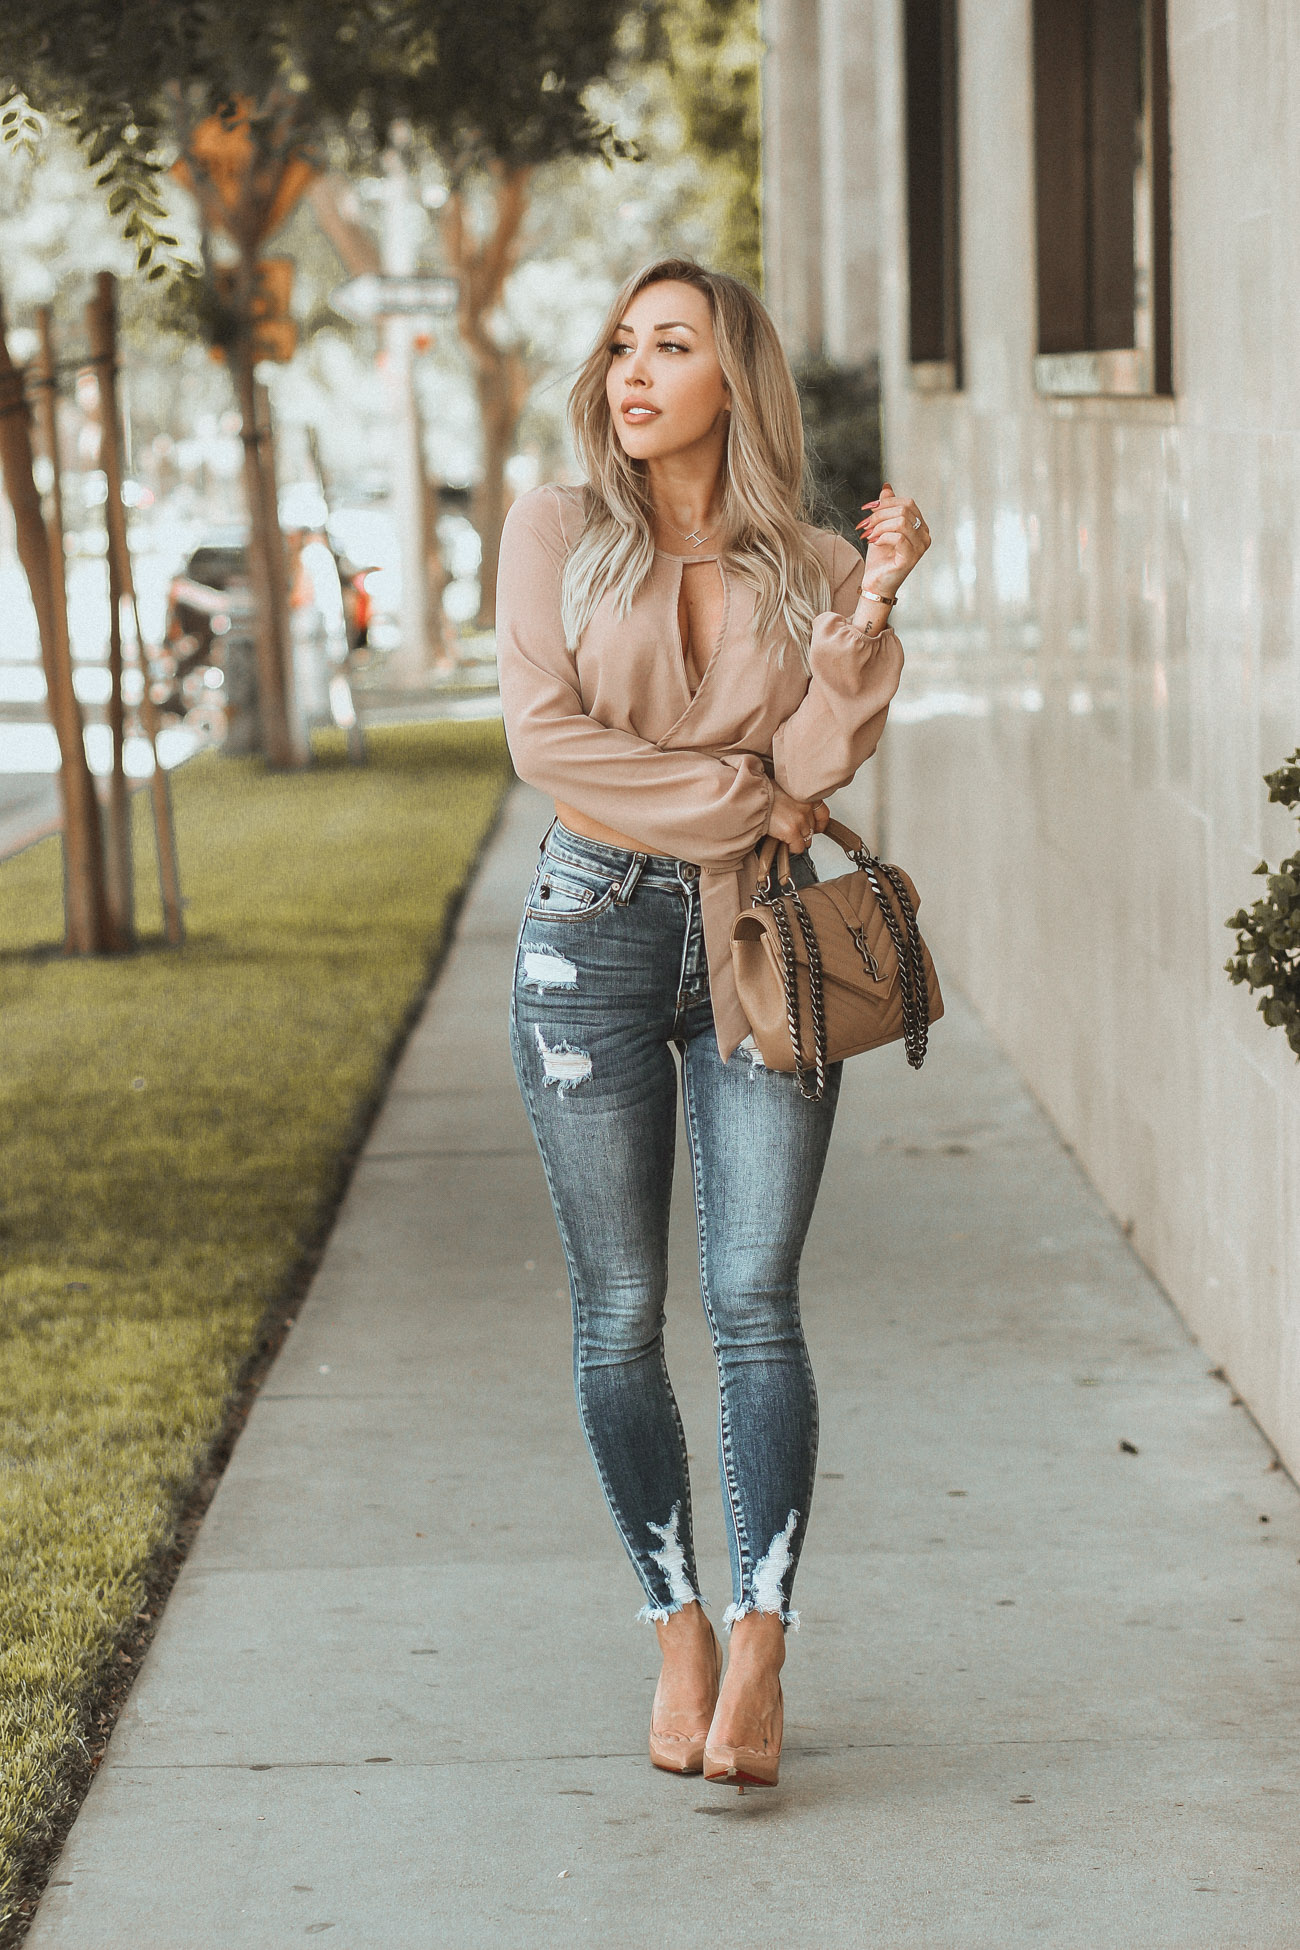 Taupe and Denim | Street Style | Fashion Blogger | YSL Bag | Blondie in the City by Hayley Larue